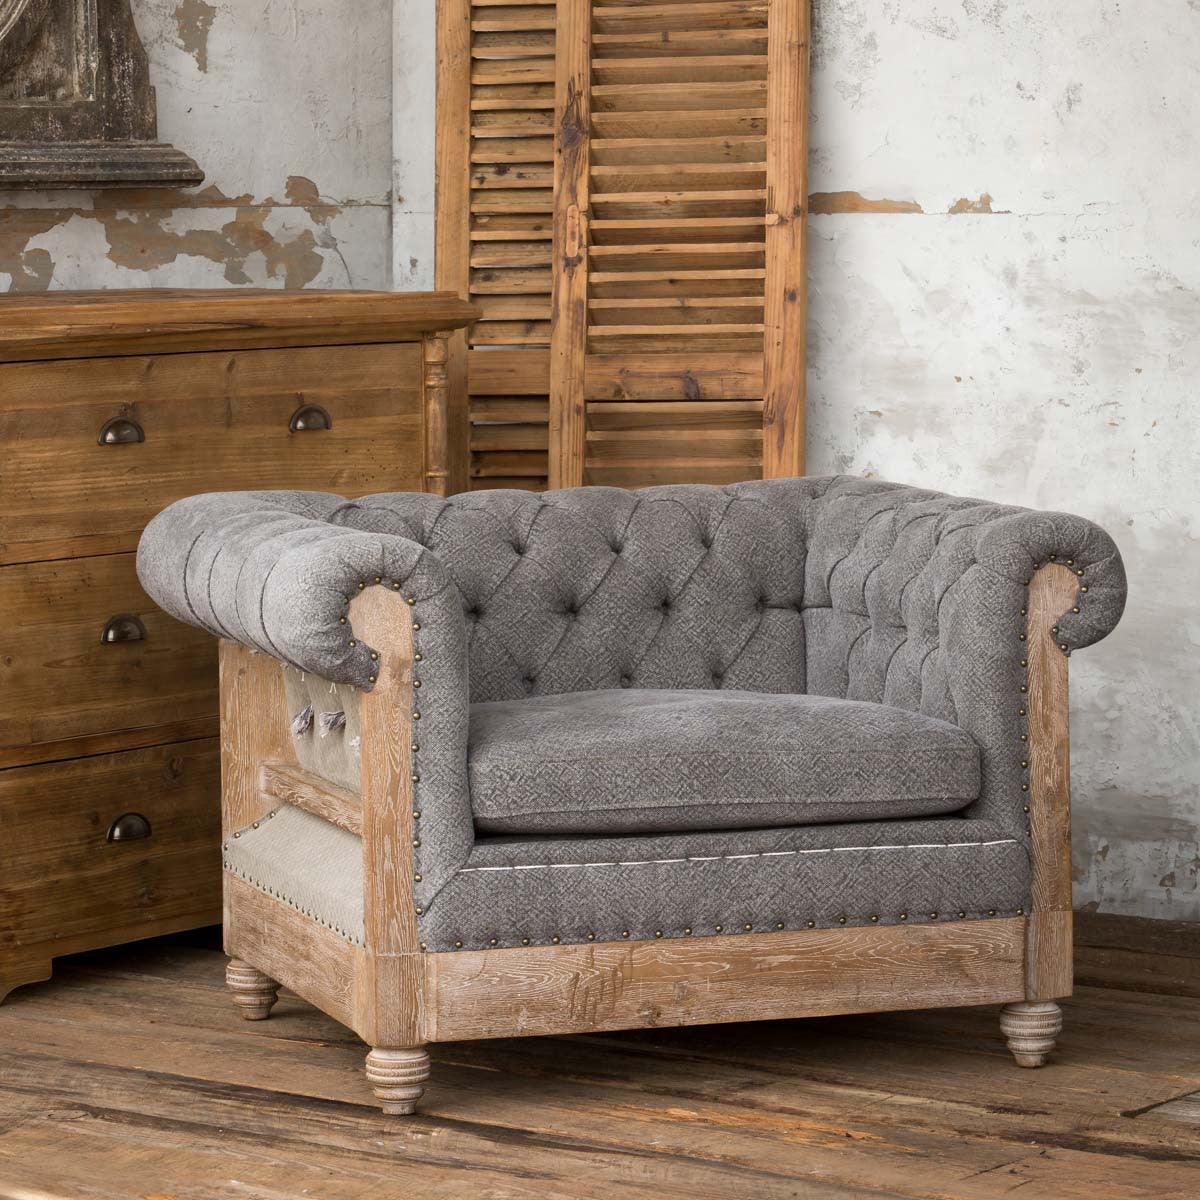 Capital Hotel Chesterfield Chair - Signastyle Boutique